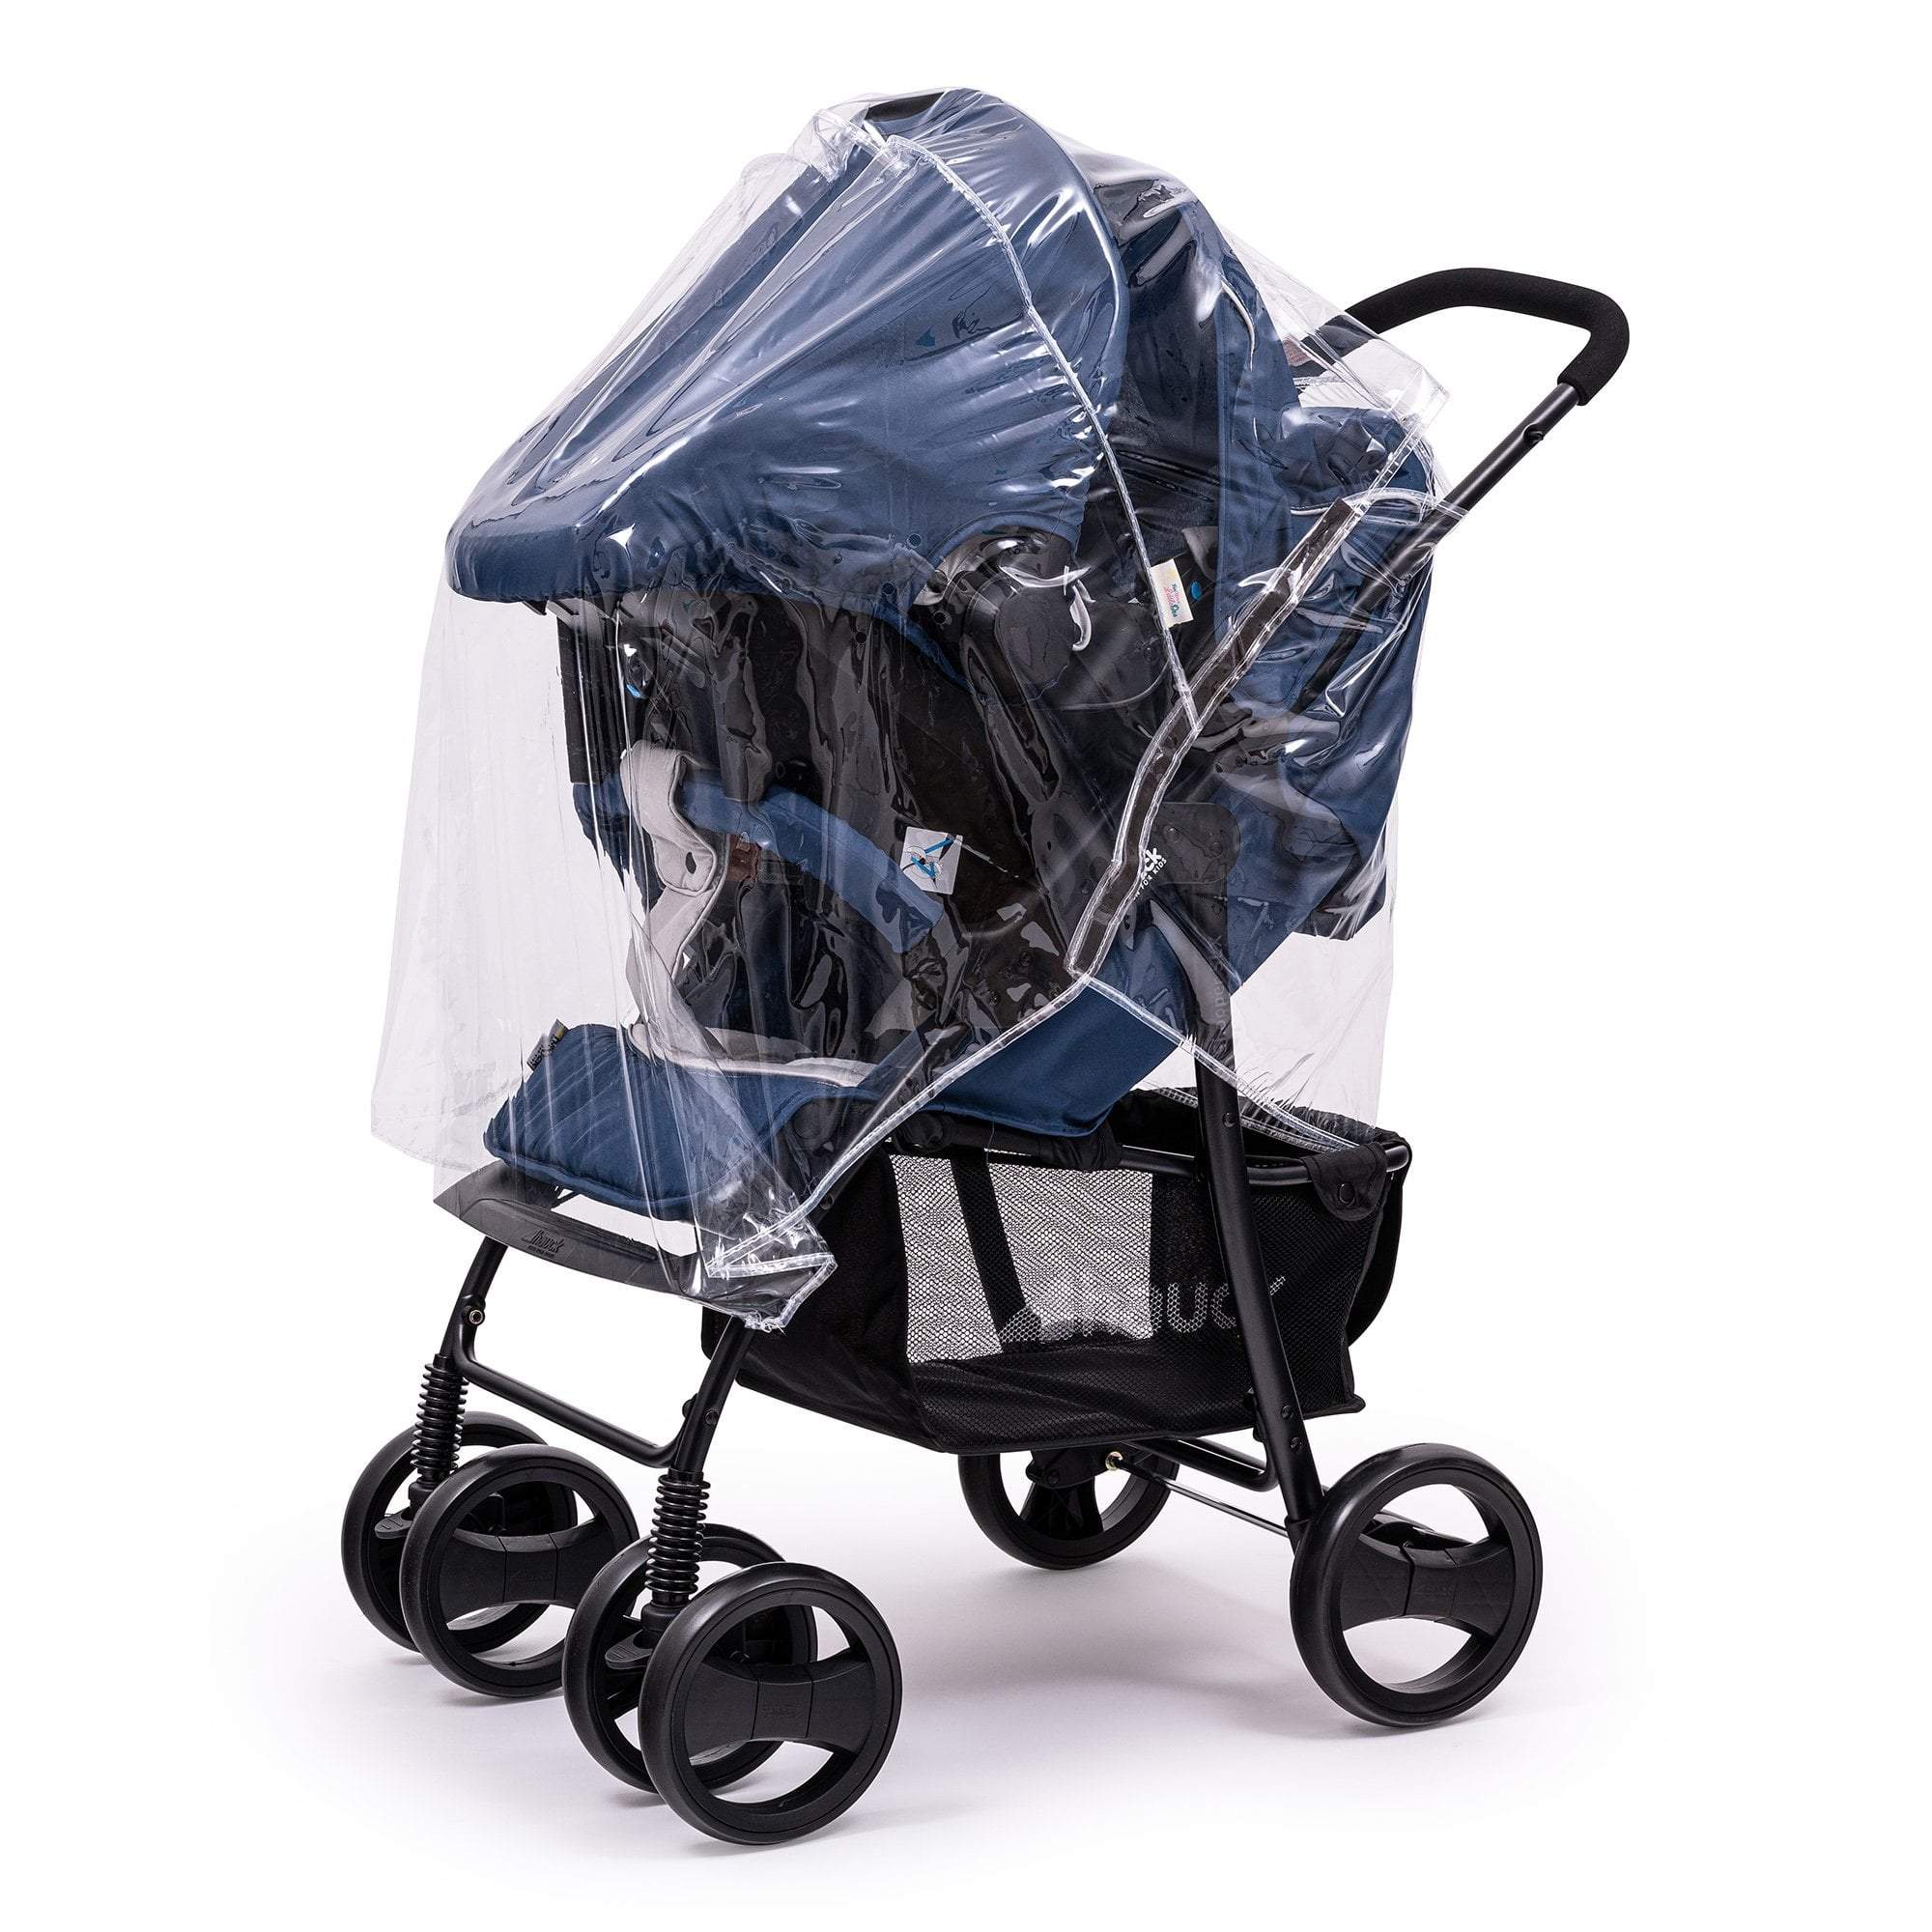 Travel System Raincover Compatible with Stokke - Fits All Models - For Your Little One